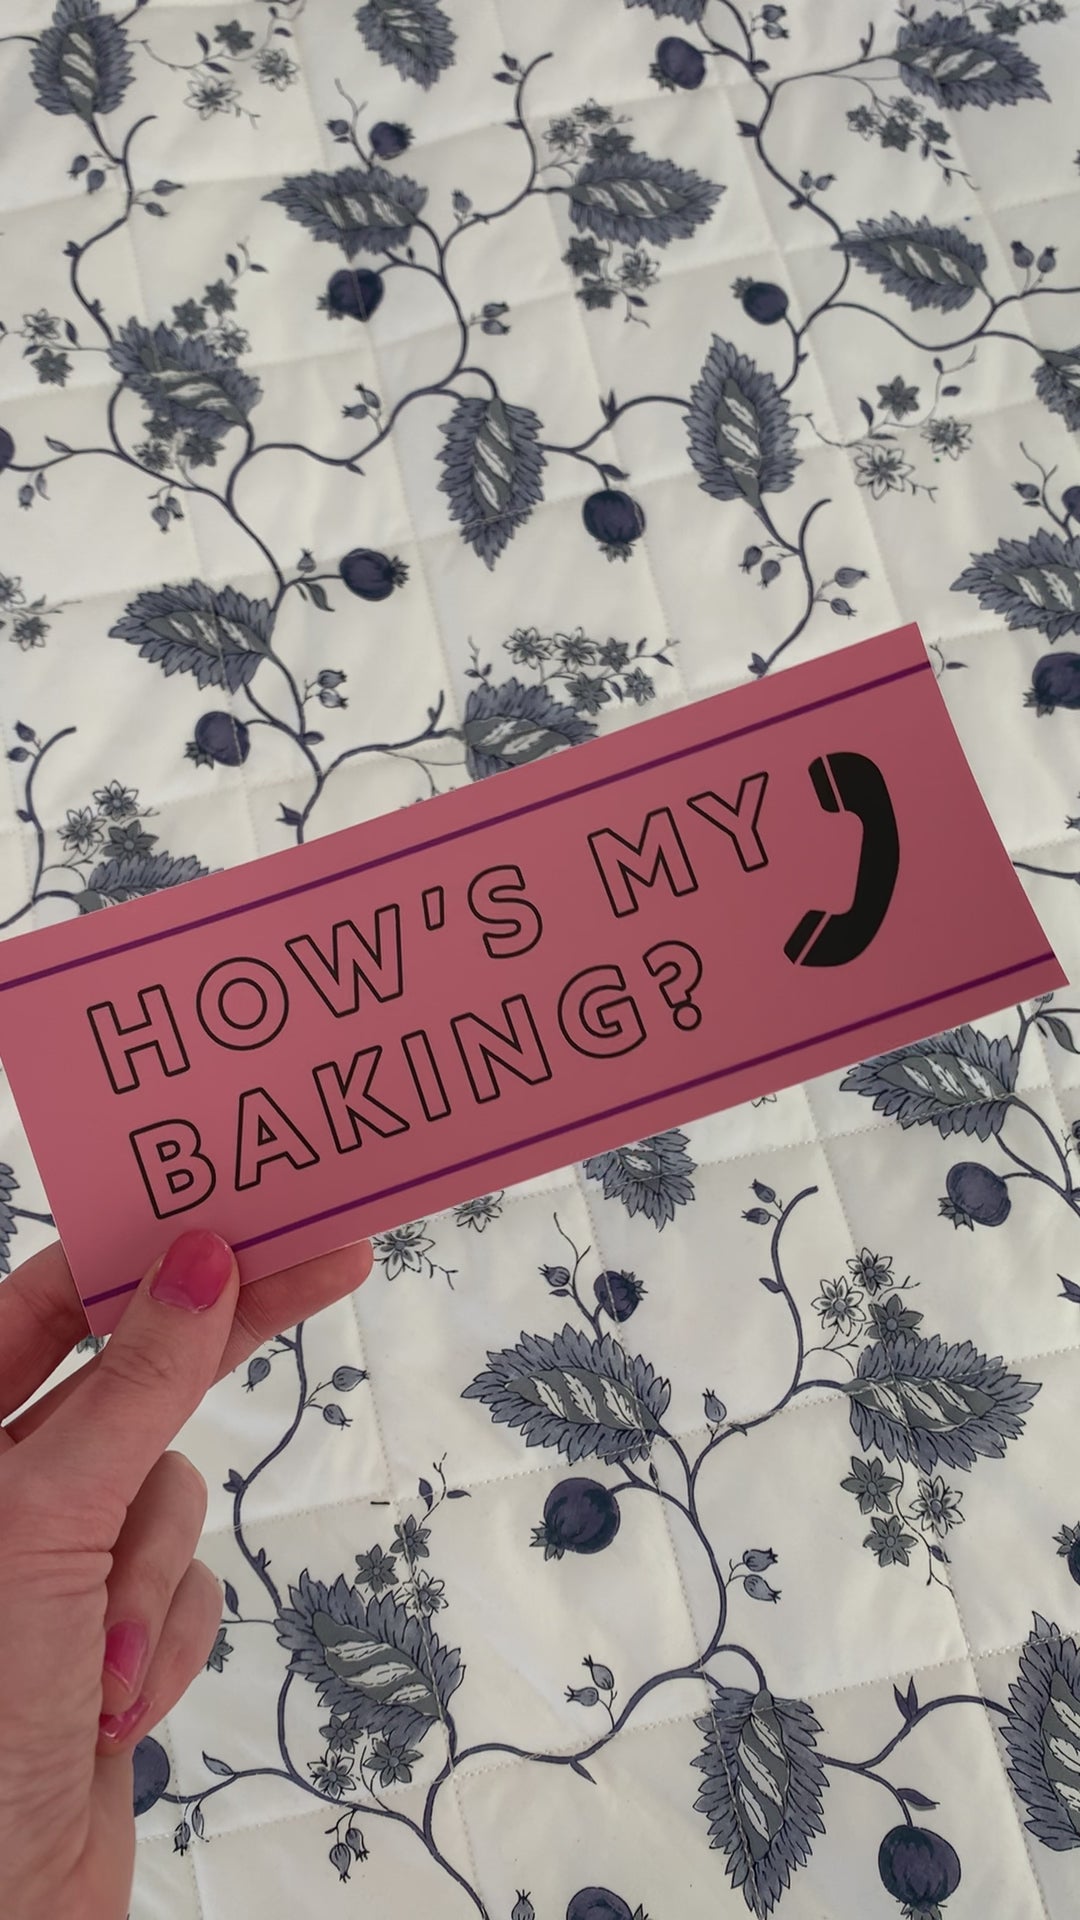 A woman holds a bumper sticker that reads "Hows my baking?"